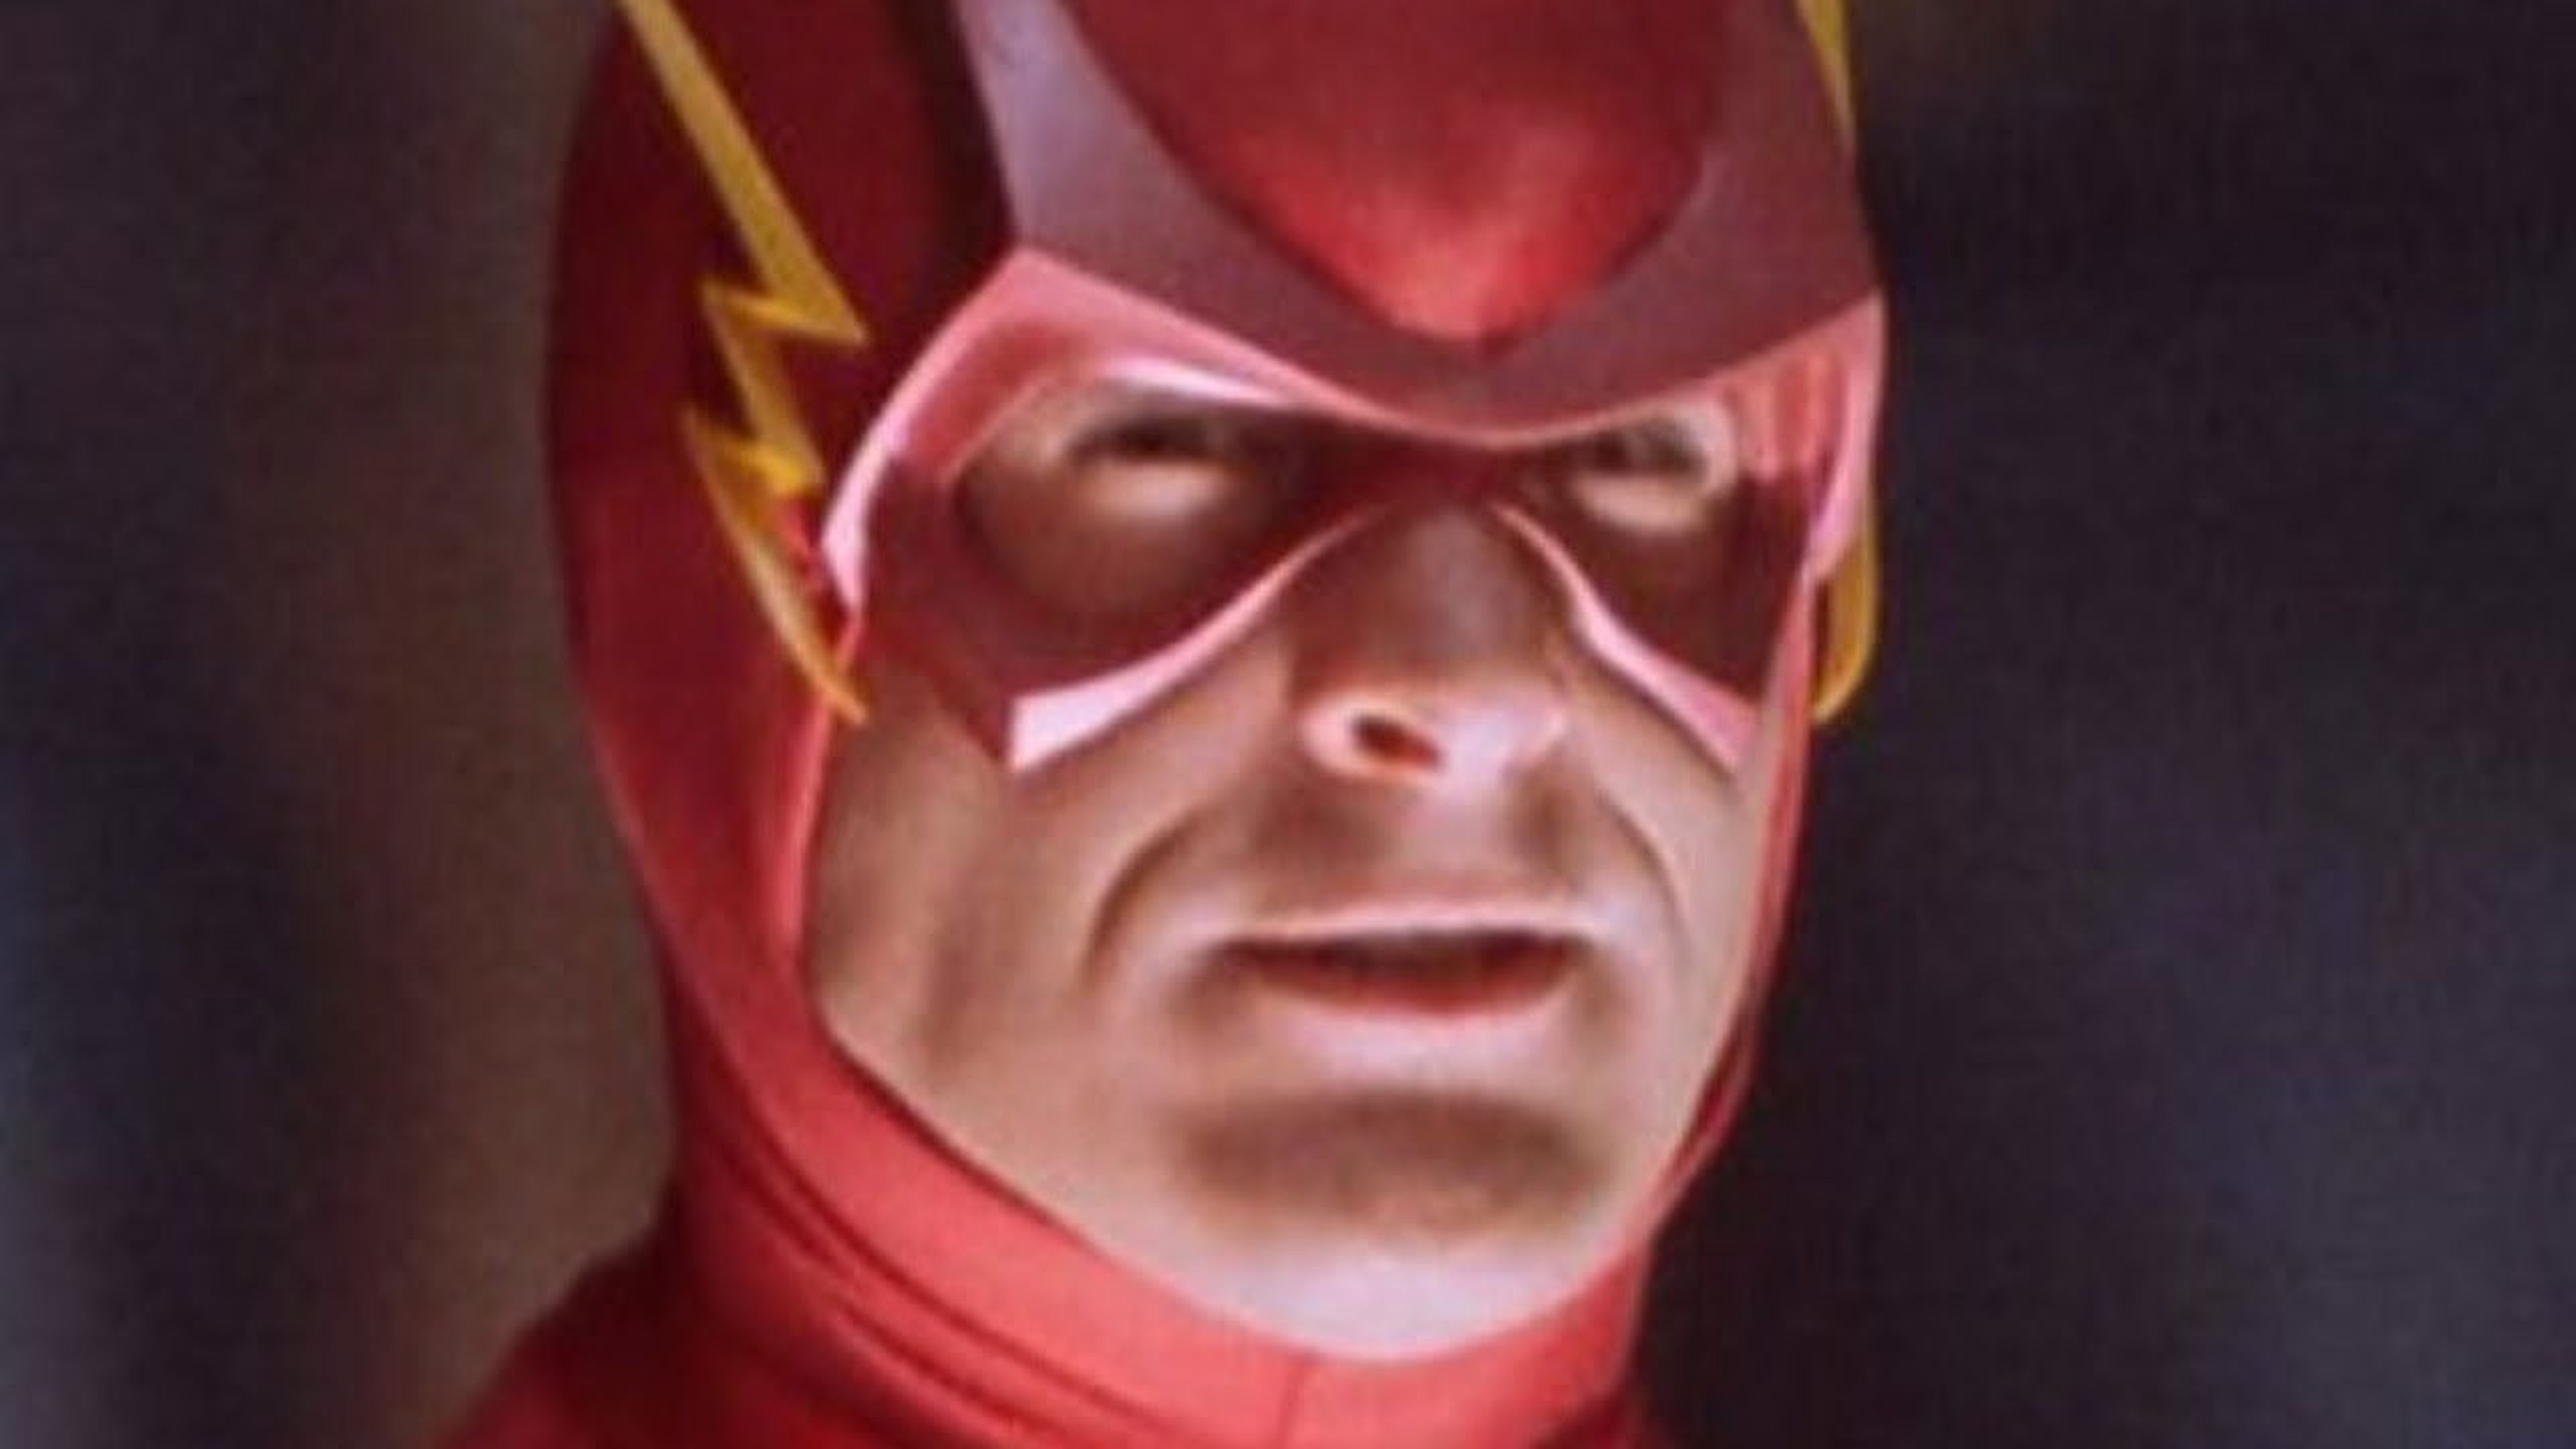 Justice League of America (1997) - Flash (Kenny Johnston)